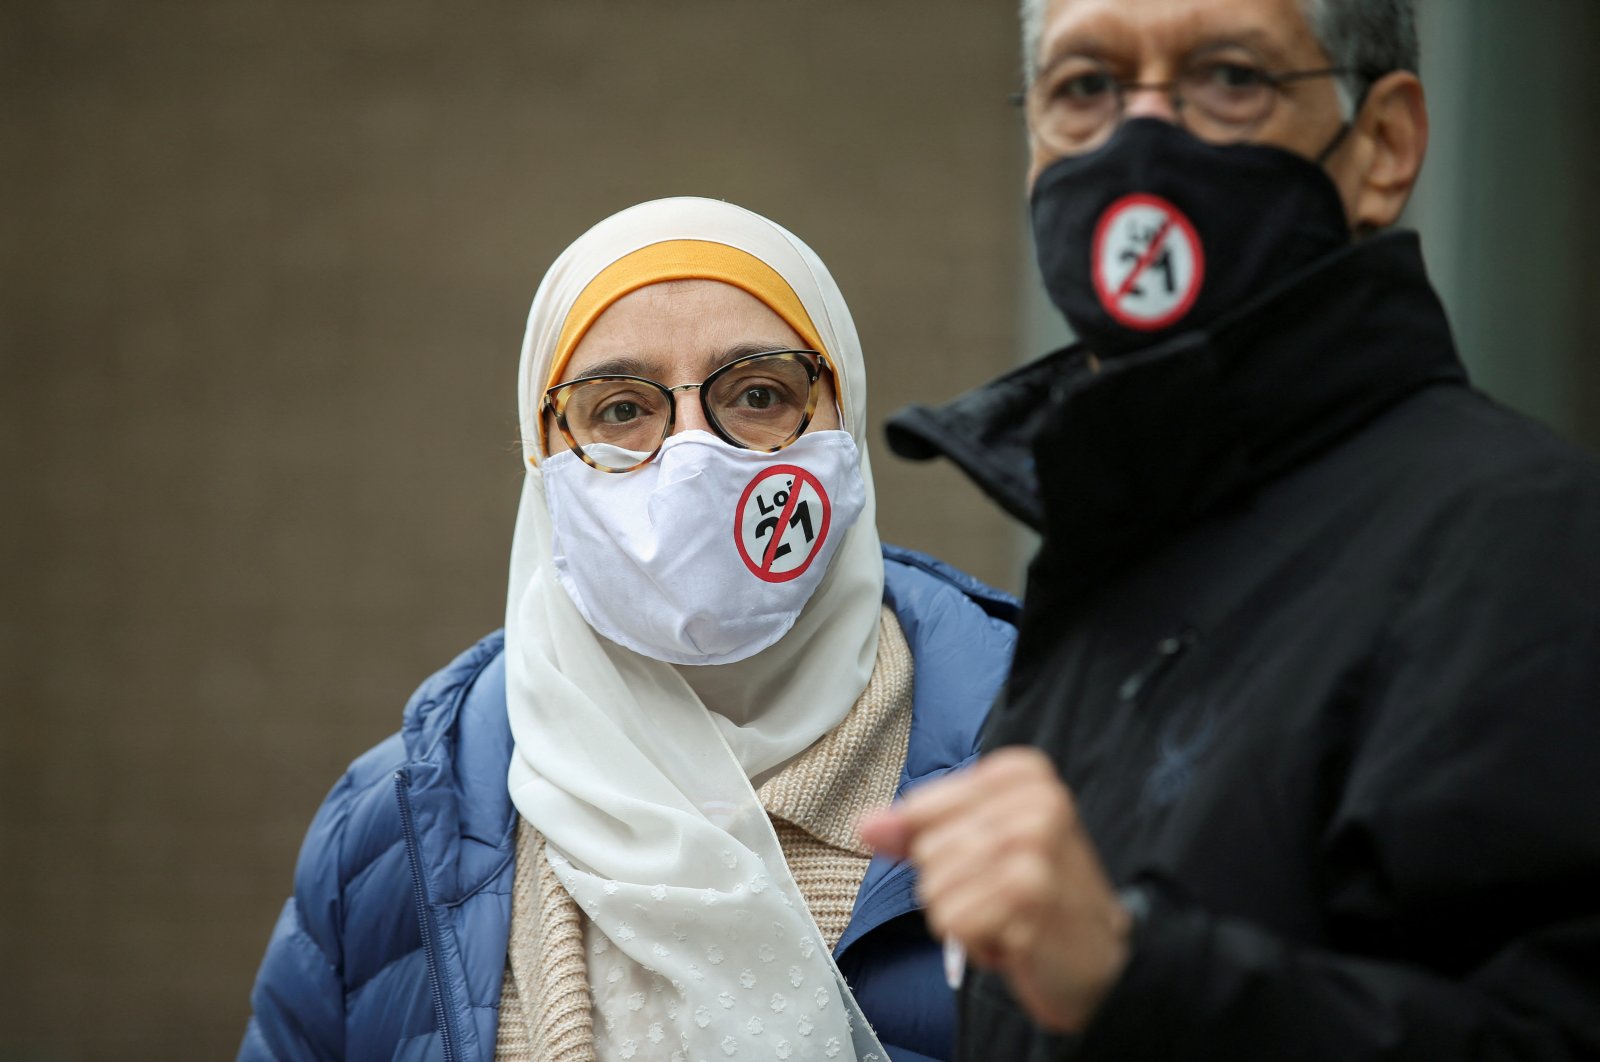 People attend a protest against Bill 21, after a court ruled that some teachers and provincial politicians are exempt from a controversial law that bans public employees from wearing religious symbols, in Montreal, Quebec, Canada, April 20, 2021. (Reuters File Photo)